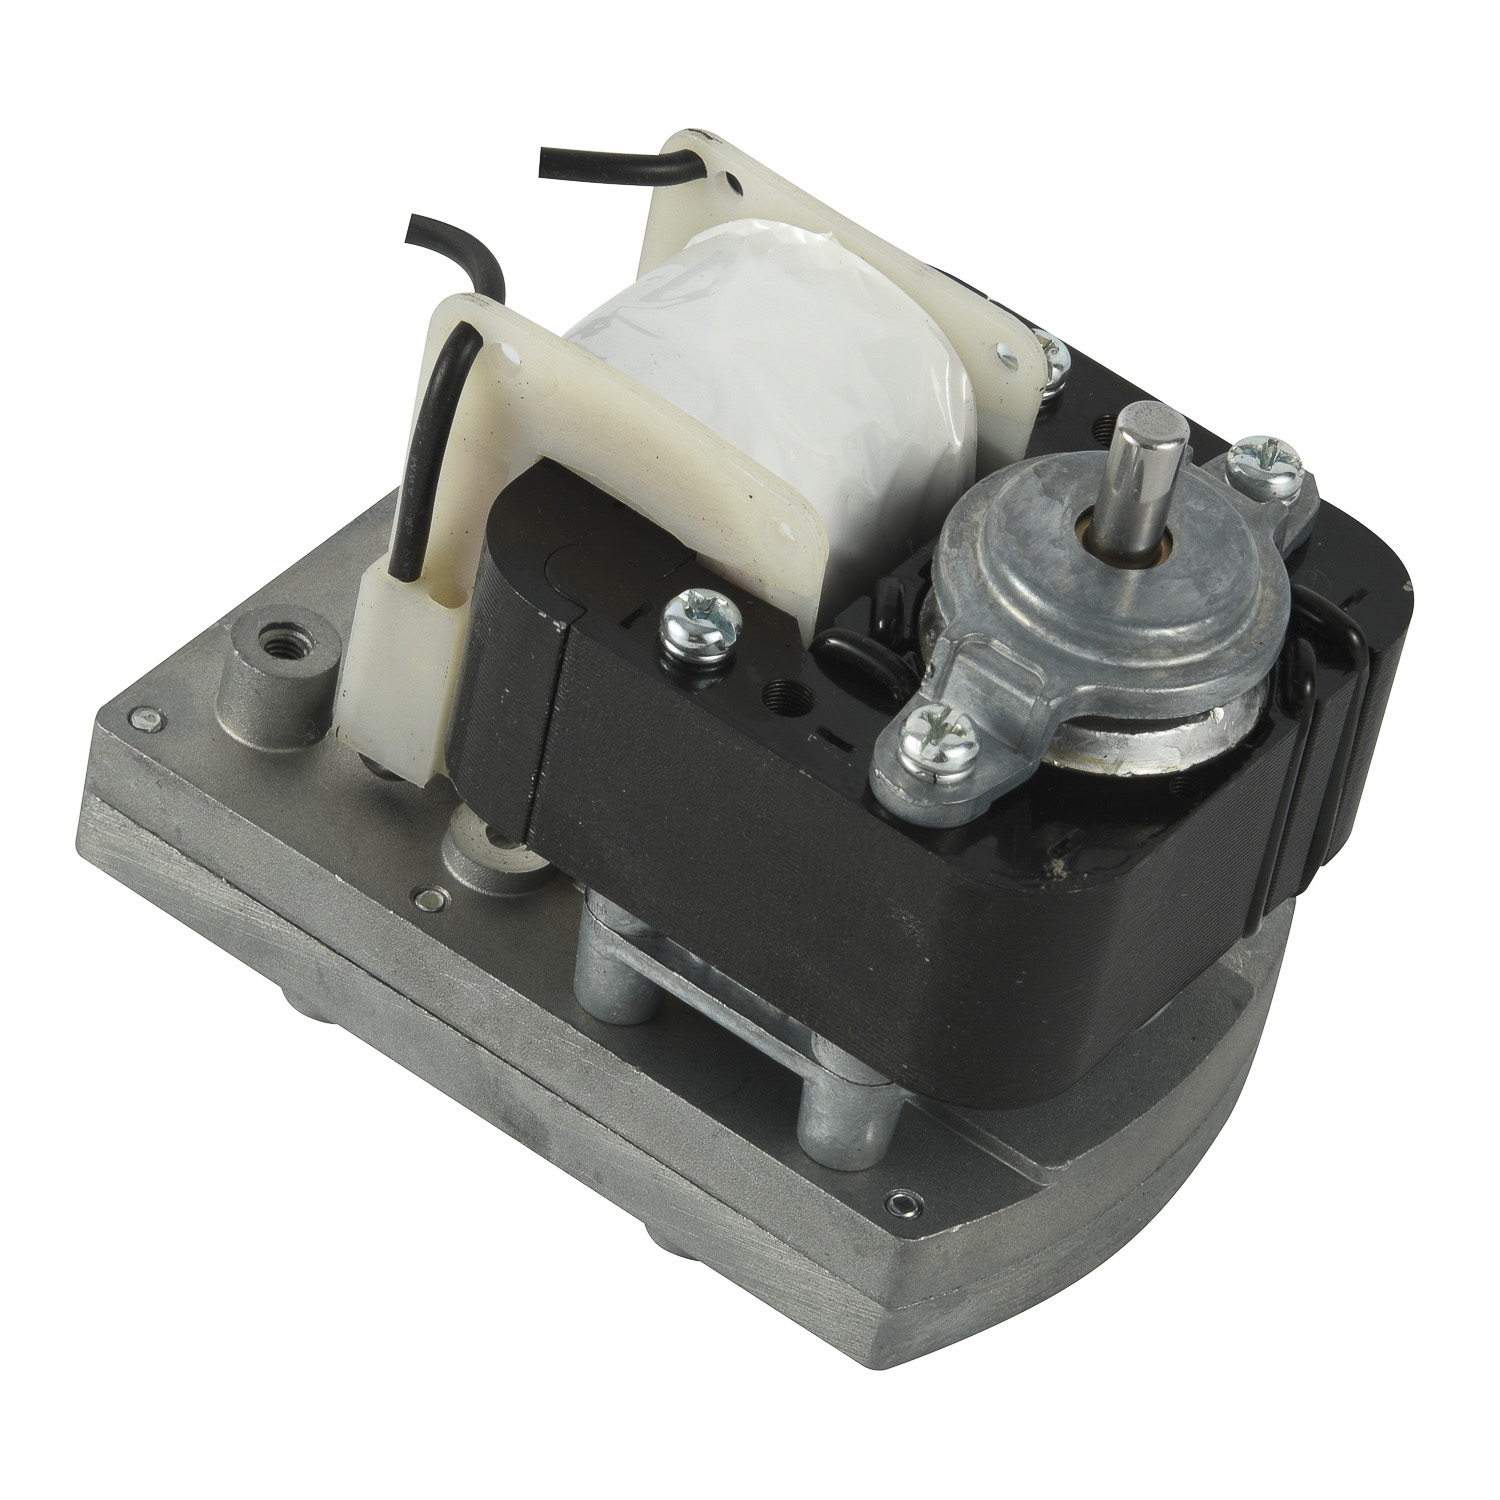 China Factory AC Shaded Pole Gear Motor For Fireplace